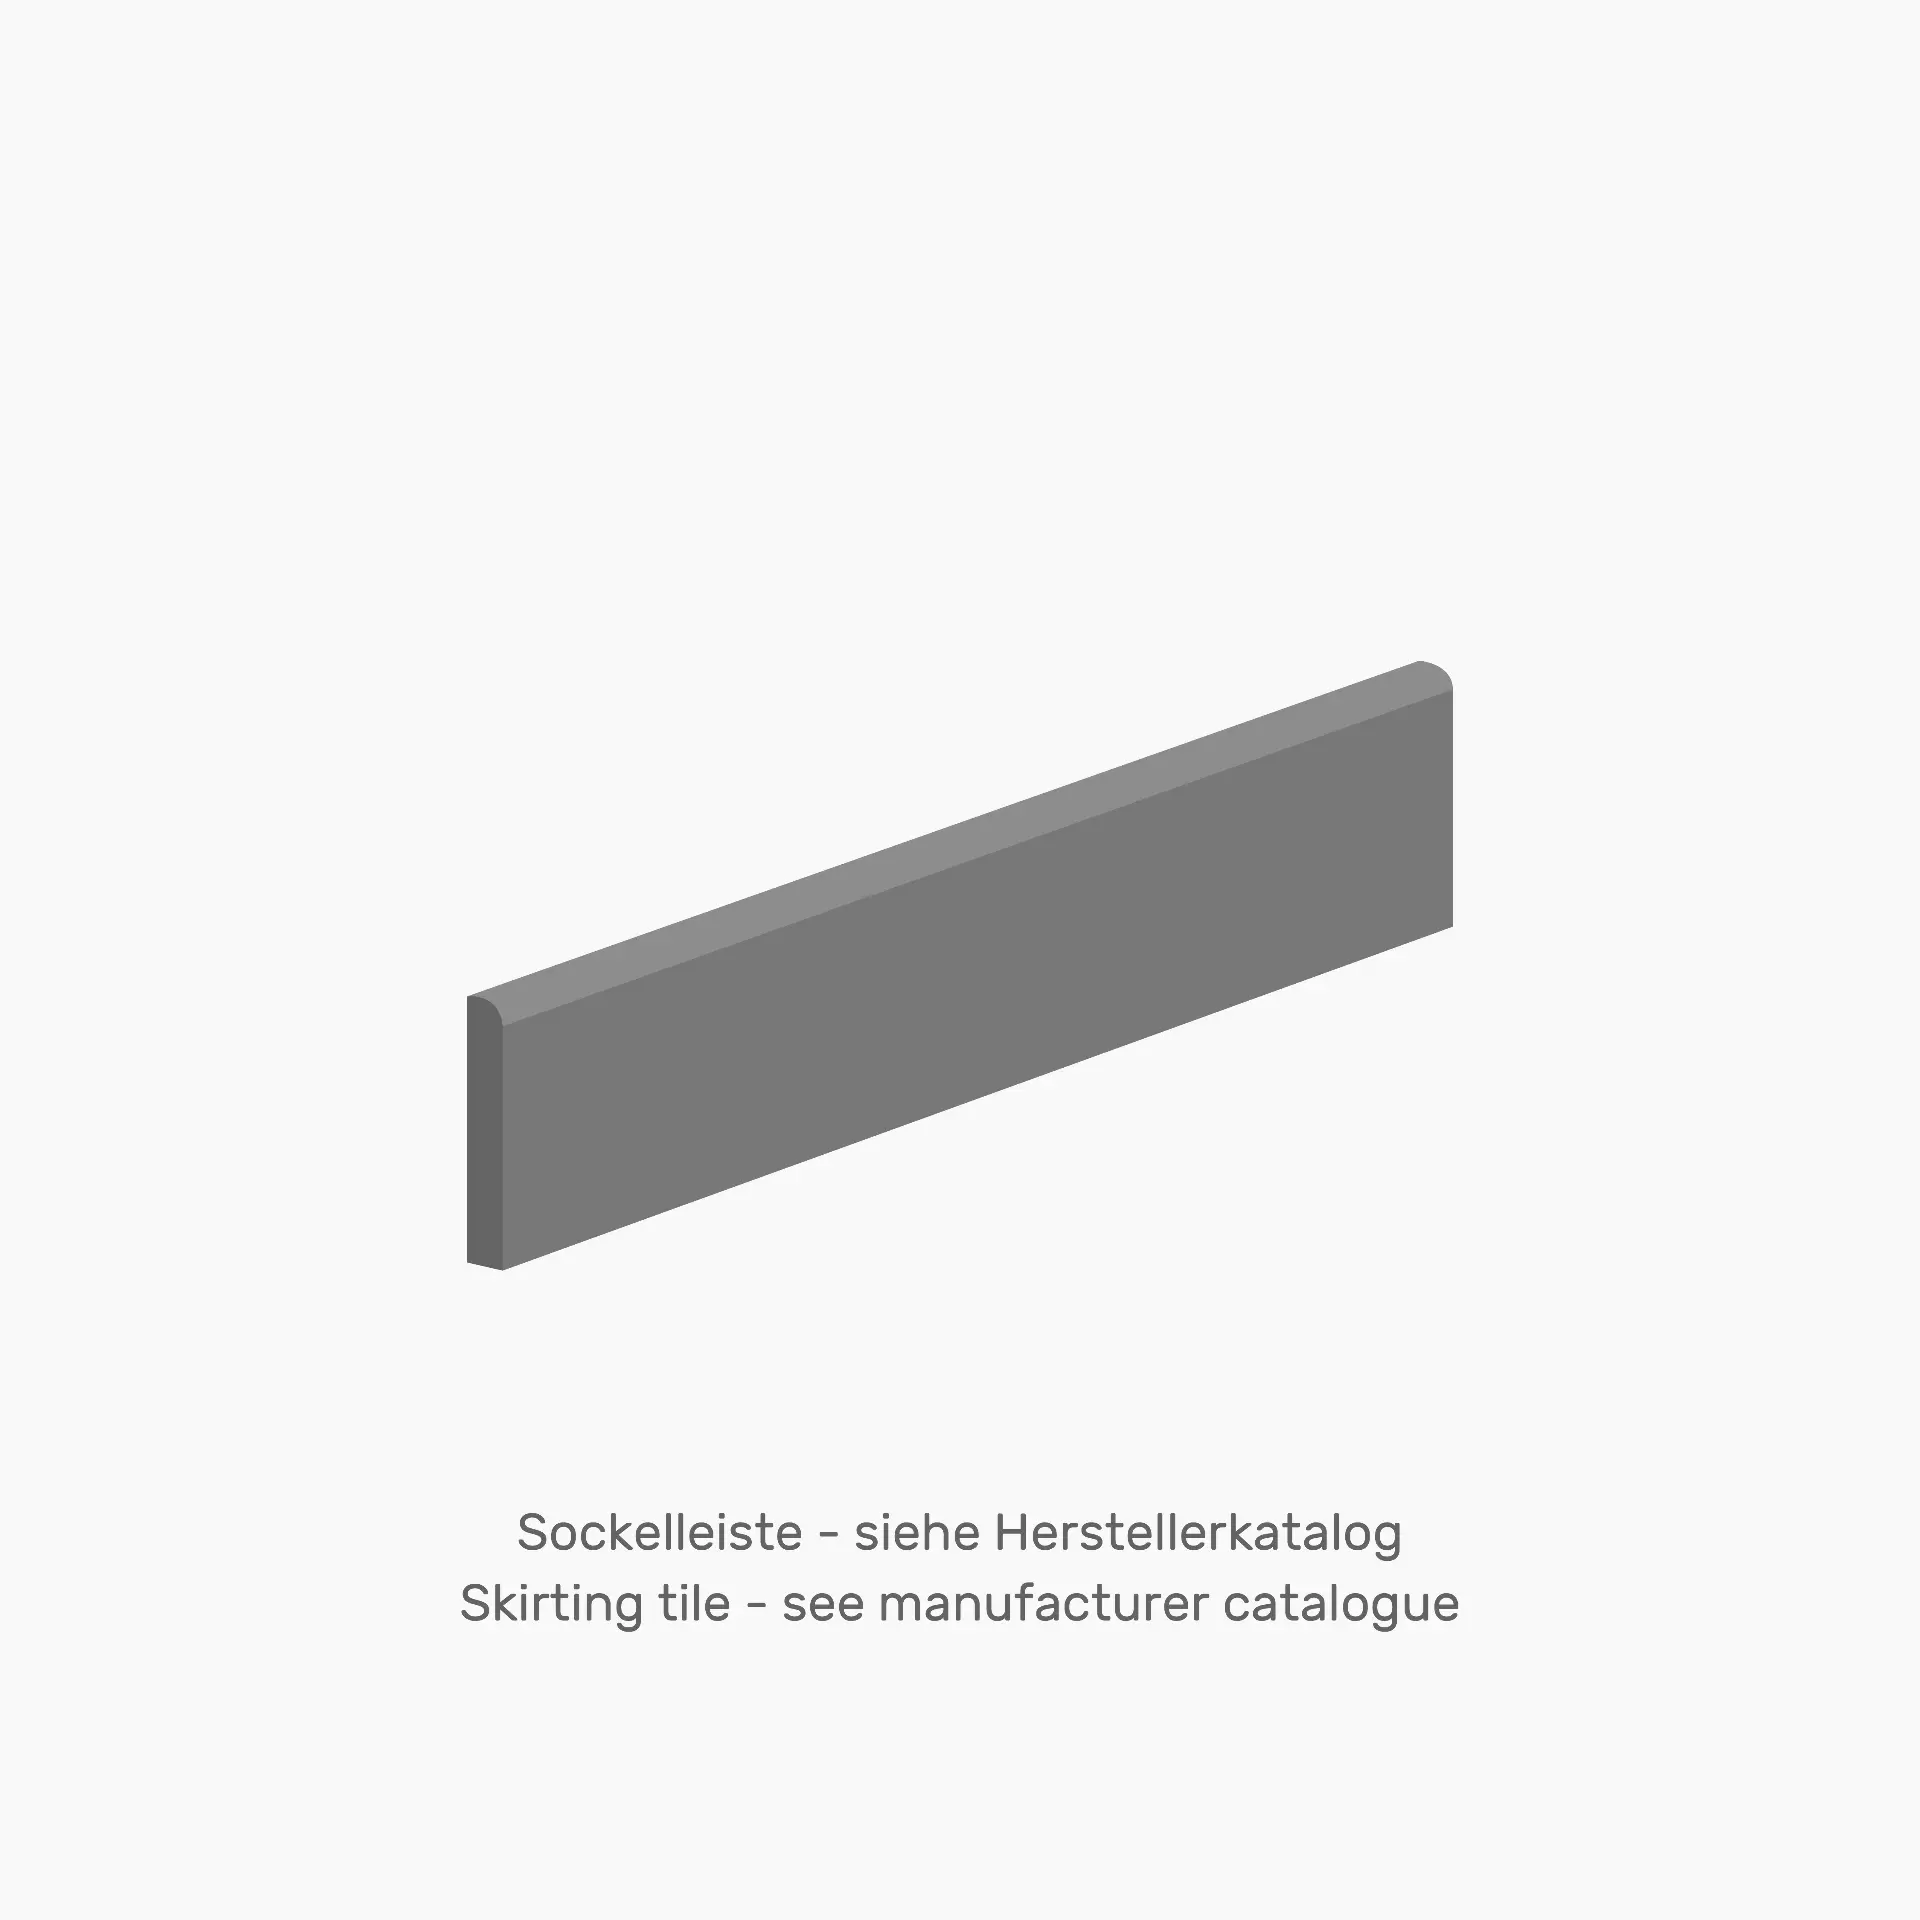 Del Conca Hse Stone Edition Dinamik Travertino Hse Naturale Skirting board G0SE10R60 7,5x60cm rectified 8,5mm